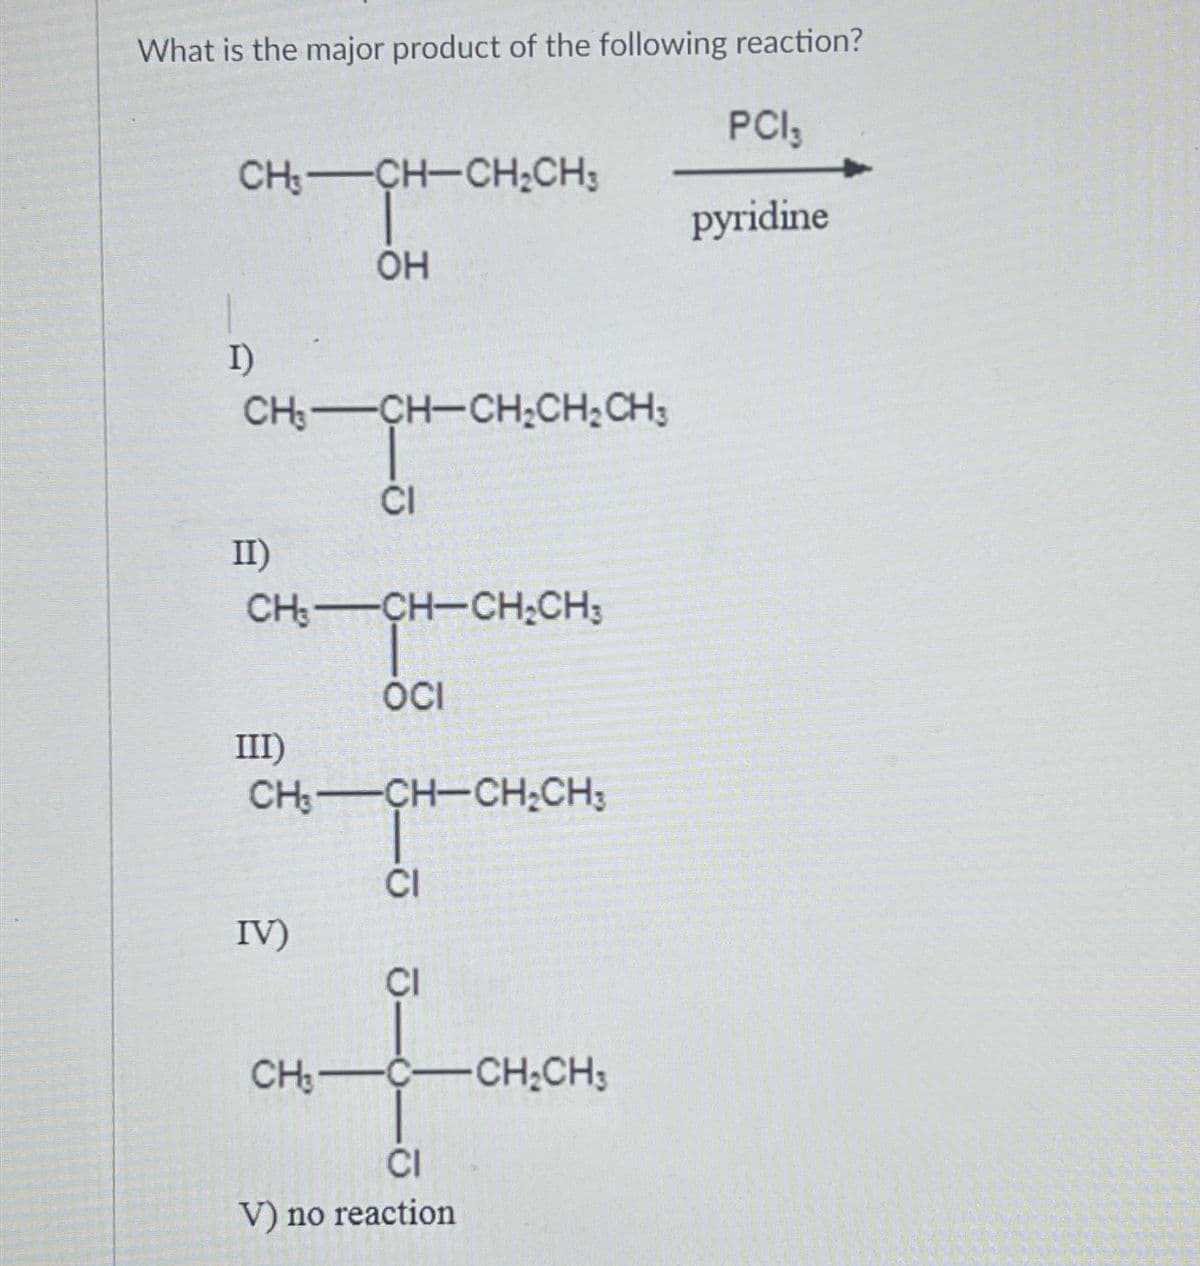 What is the major product of the following reaction?
PCI 3
pyridine
CH—CH–CH;CH3
OH
I)
CH3-CH-CH₂CH₂CH3
II)
CH3-CH-CH₂CH3
OCI
III)
CI
CH—CH–CH;CH,
CI
IV)
CI
CH,—ệ—CHỊCH,
CI
V) no reaction